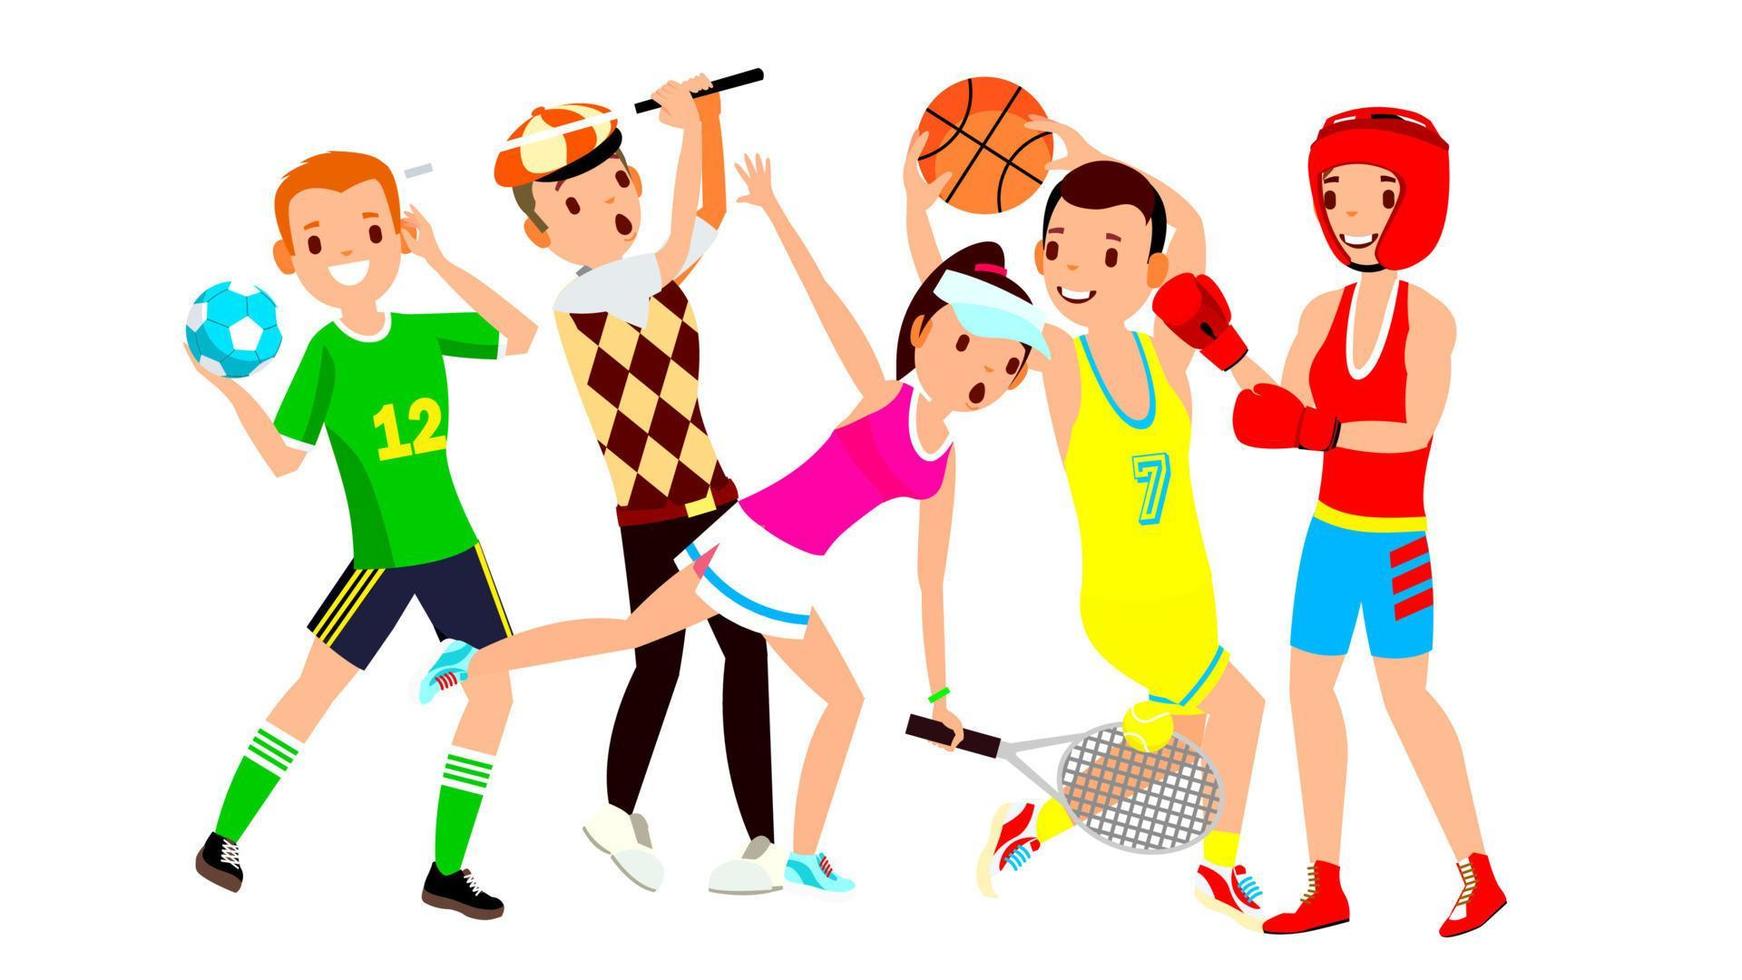 Athlete Set Vector. Man, Woman. Handball, Golf, Tennis, Basketball, Boxing. Group Of Sports People In Uniform, Apparel. Sportsman Character In Game Action. Flat Cartoon Illustration vector